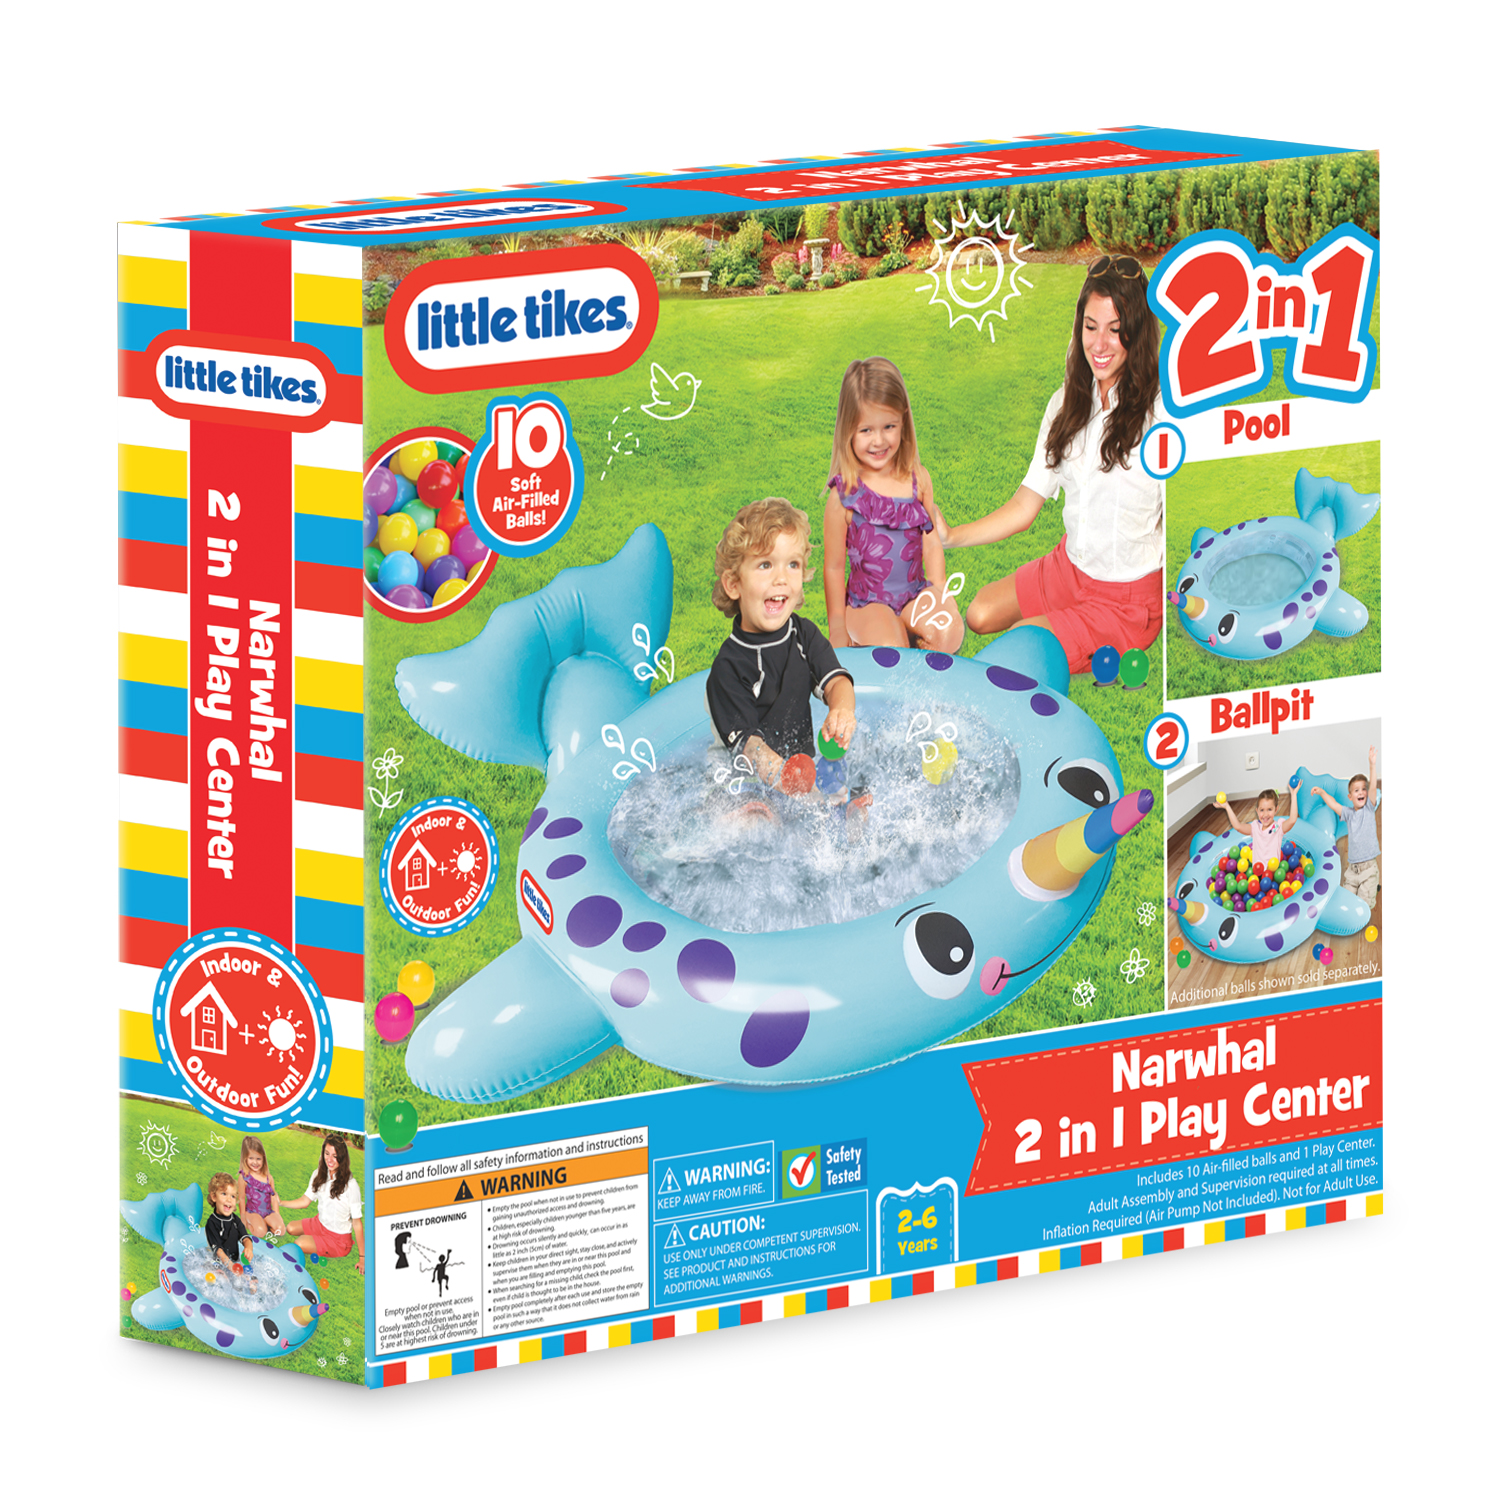 Little Tikes Narwhal 2 in1 Play Center, Ball Pit Round Splash Area, Kids 2-6 Years Old - image 1 of 5